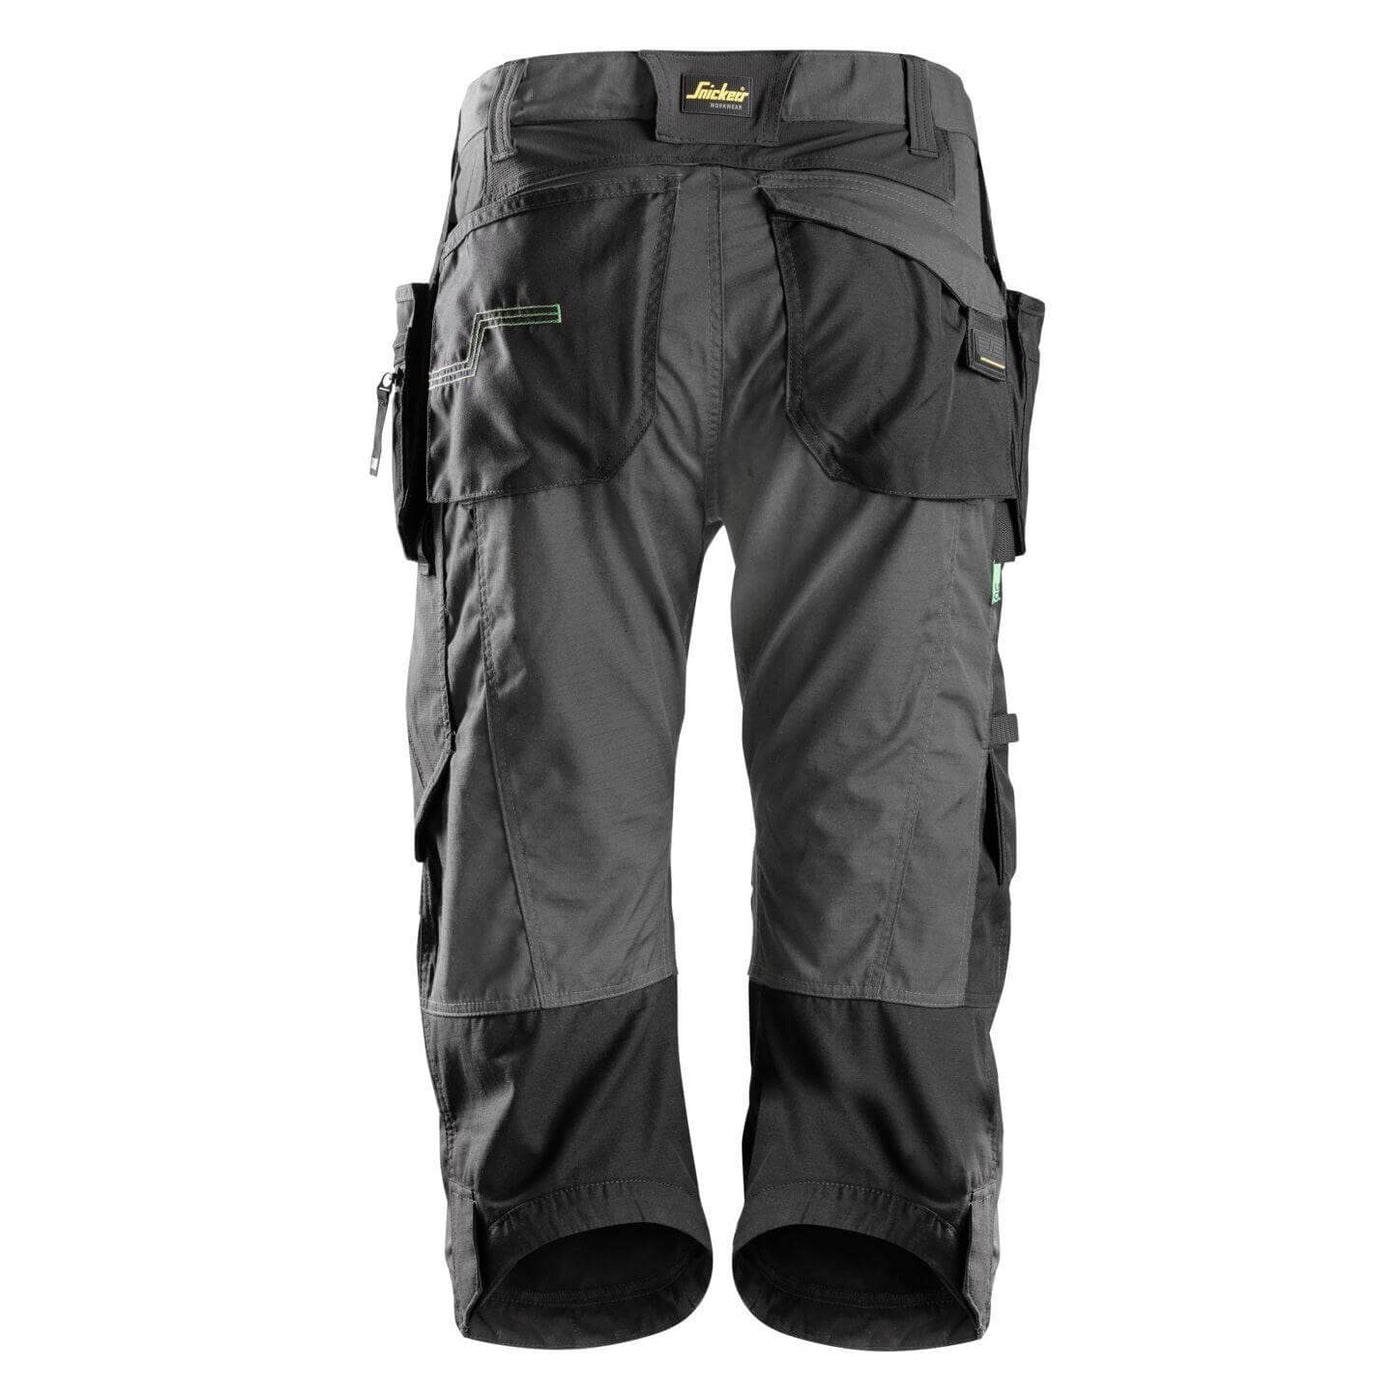 Snickers 6905 FlexiWork Lightweight Work Pirate Trousers with Holster Pockets Steel Grey Black back3108881 #colour_steel-grey-black